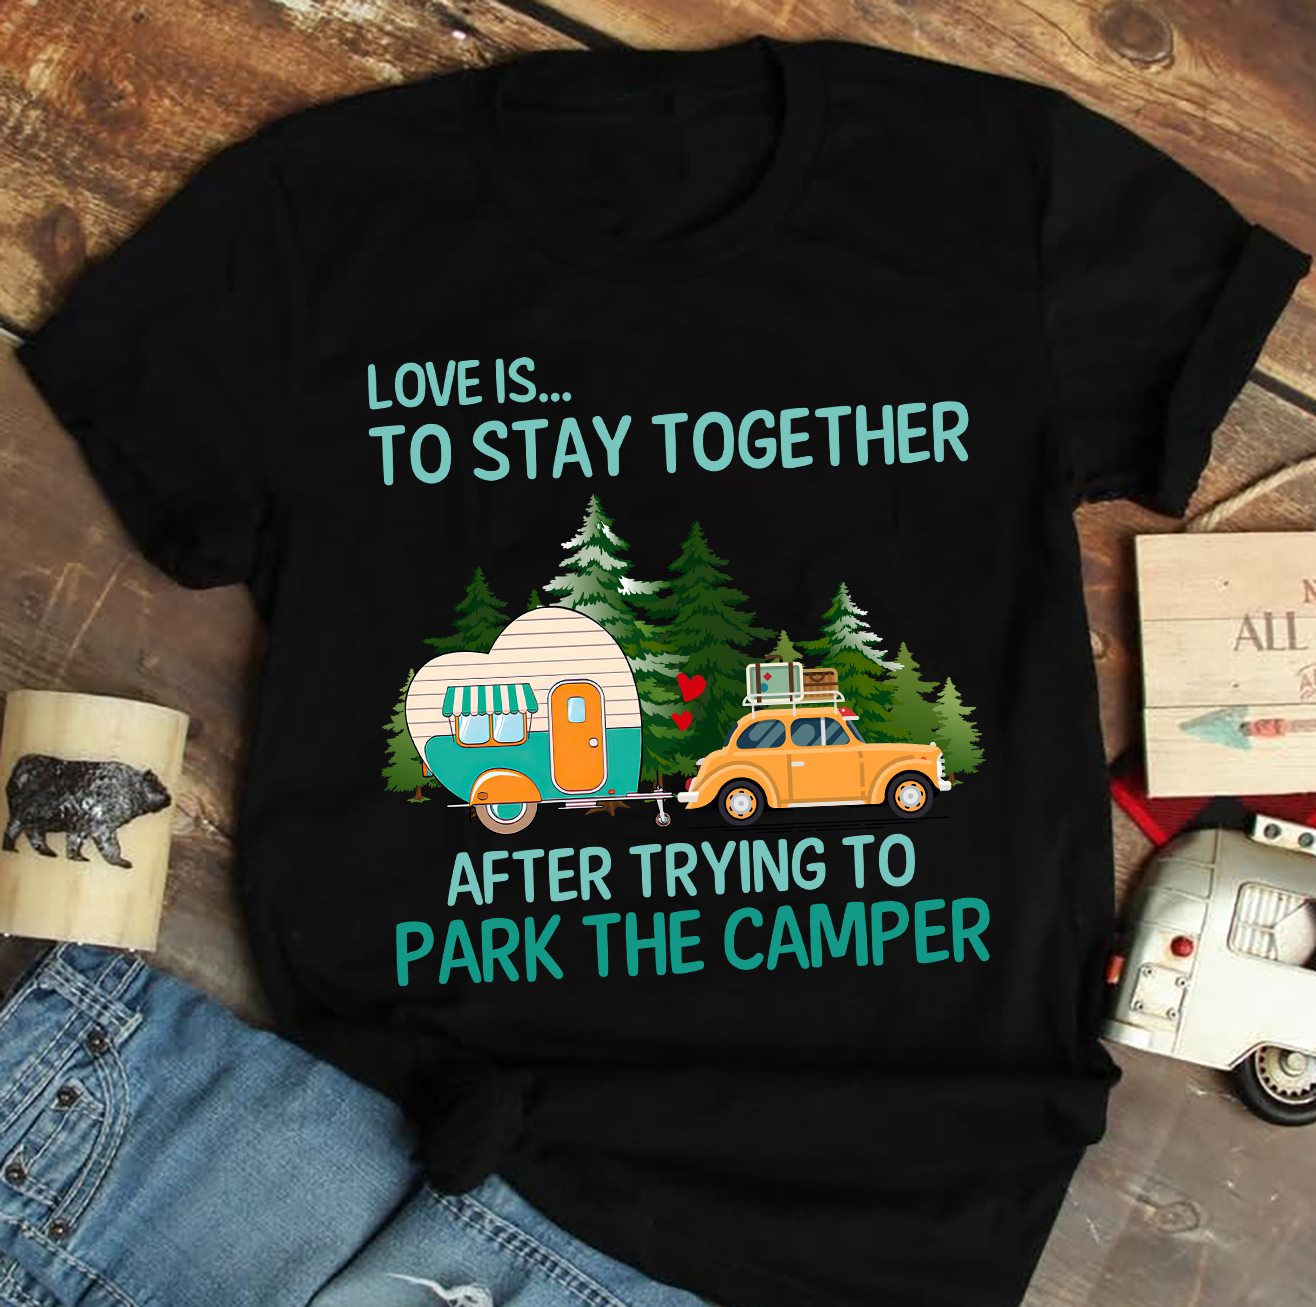 Love is to stay together after trying to park the camper